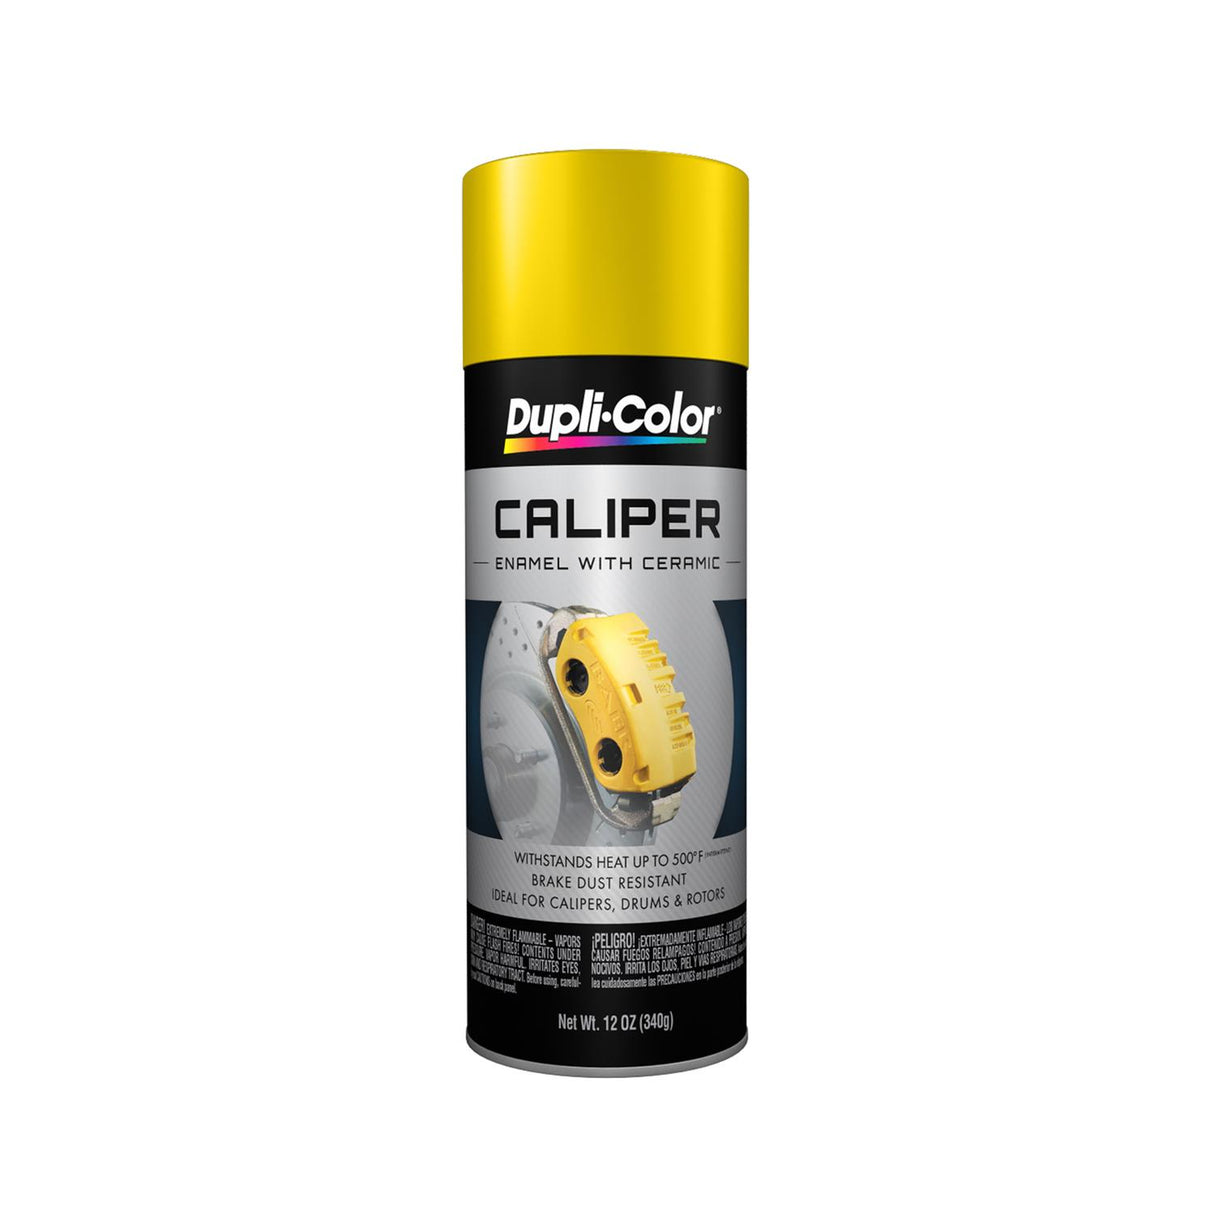 Duplicolor BCP101 Caliper Spray Paint Yellow with Ceramic - 12 oz